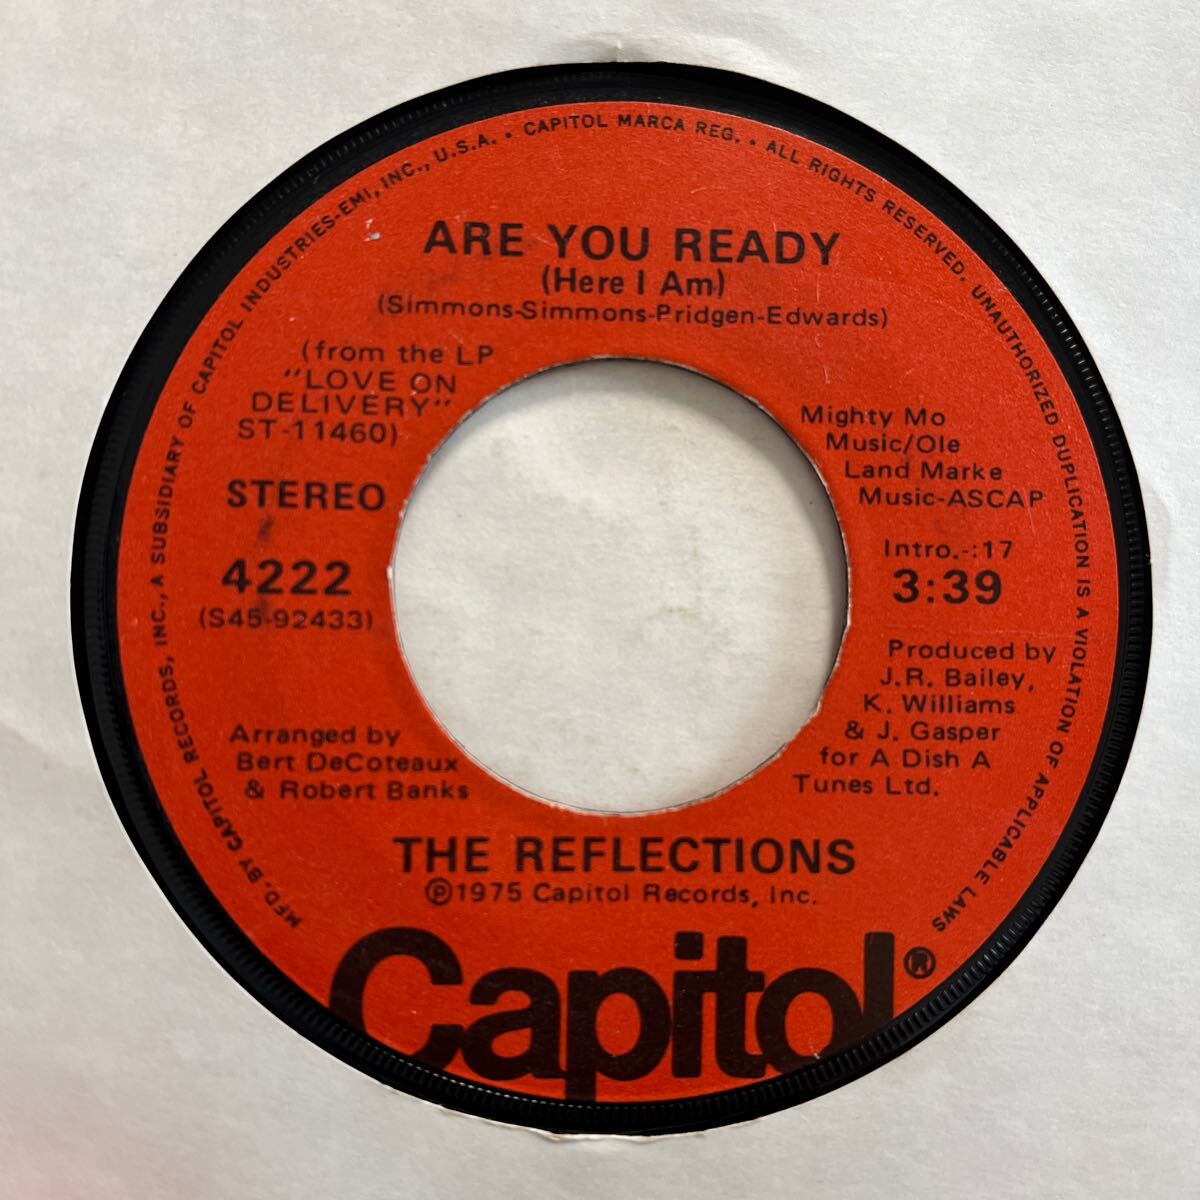 US record 7 -inch THE REFLECTIONS # DAY AFTER DAY / ARE YOU READY